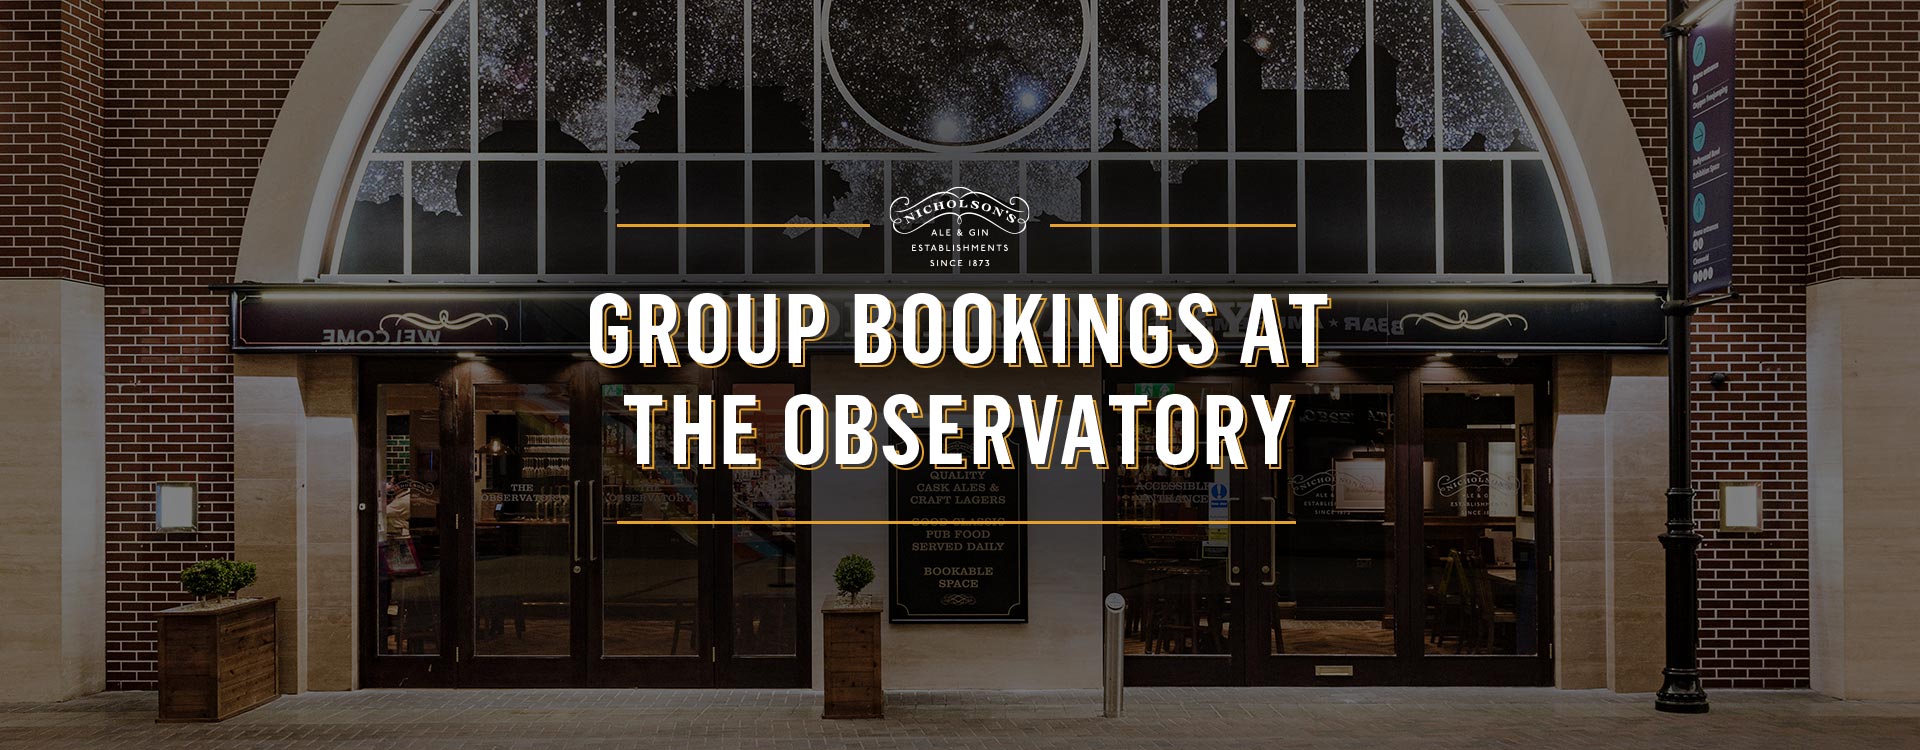 Group Bookings at The Observatory